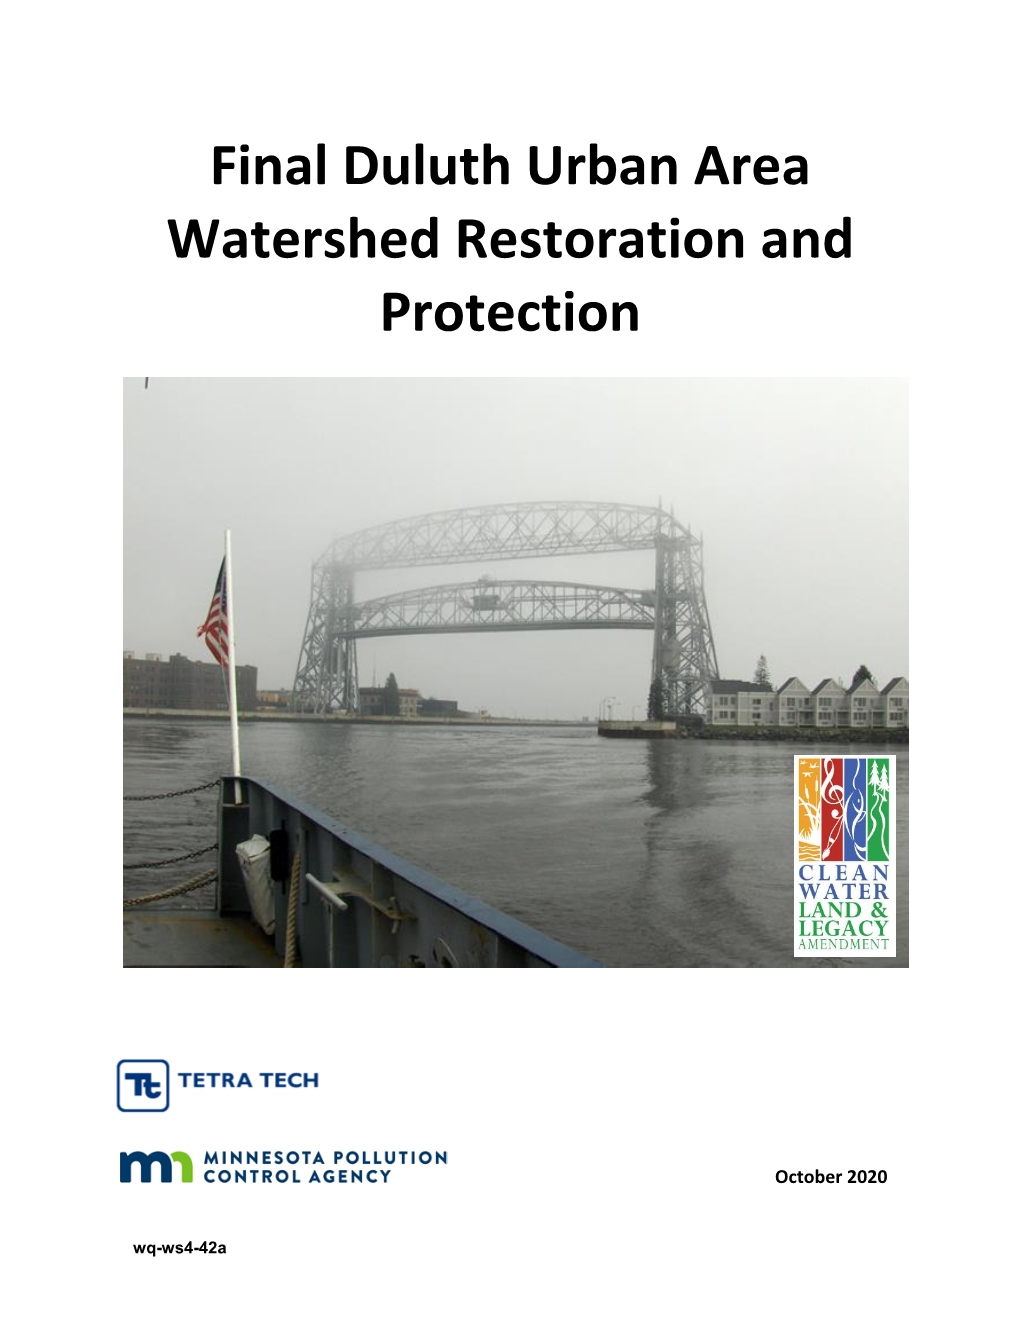 Final Duluth Urban Area Watershed Restoration and Protection Strategy